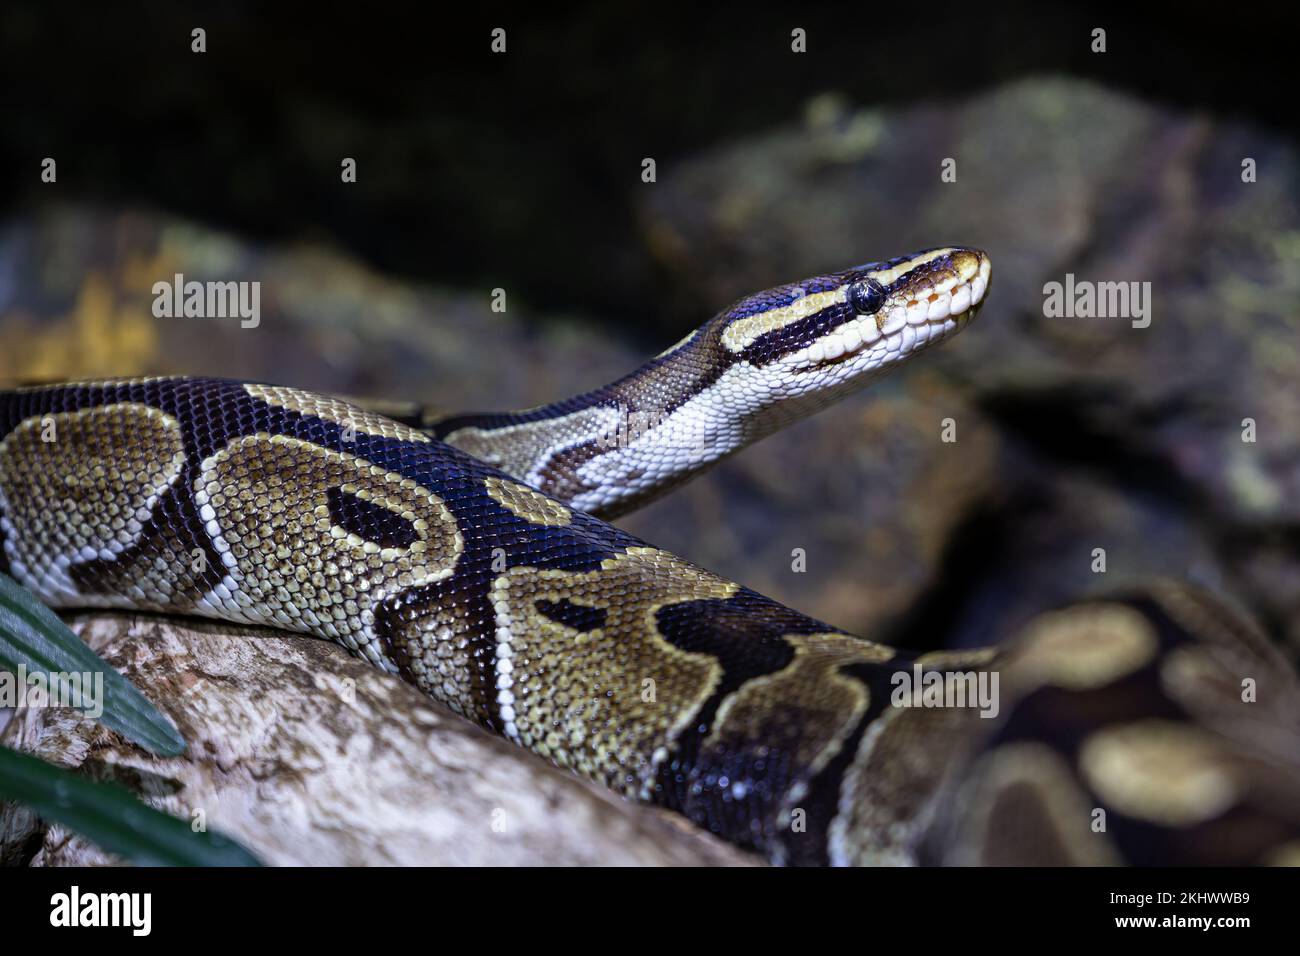 Ball python snake. Reptile and reptiles. Amphibian and Amphibians. Tropical fauna. Wildlife and zoology. Nature and animal photography. Stock Photo